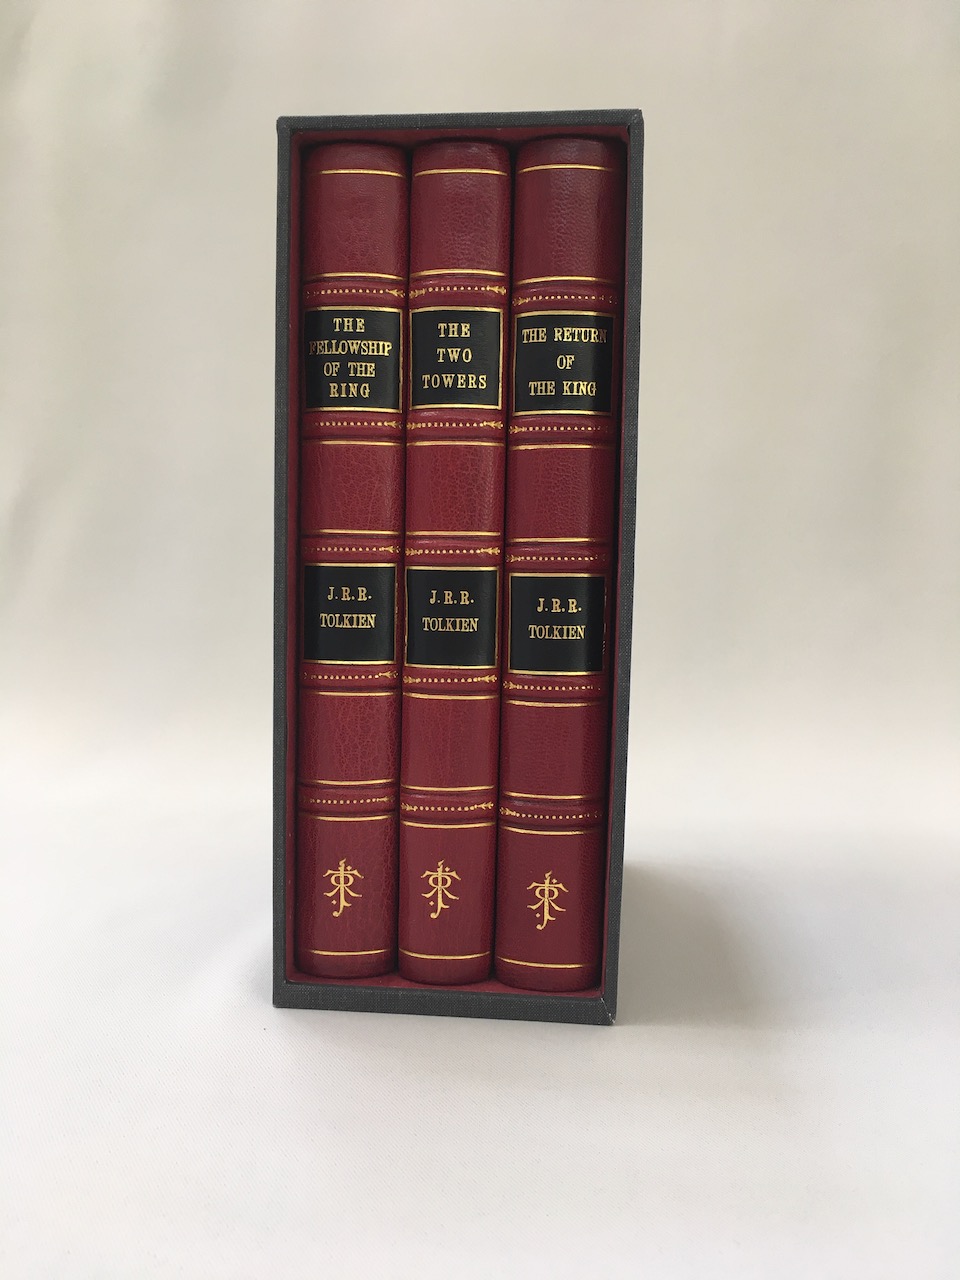 
The Lord of the Rings, George Allen & Unwin, 1954/54/55 1st UK Edition. Rebound set. 1